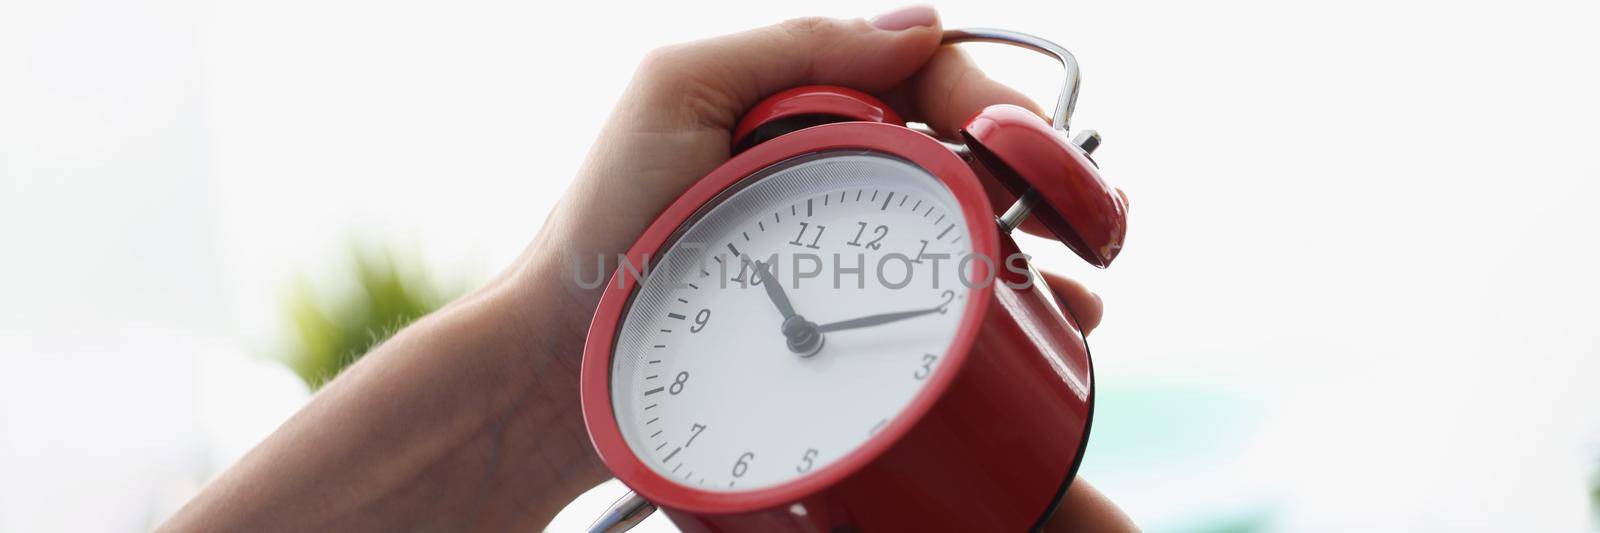 Close-up of woman setting red vintage alarm on proper time, spin arrows on dial, black numbers. Prepare alarm on morning, wake up for work, timer, timepiece concept